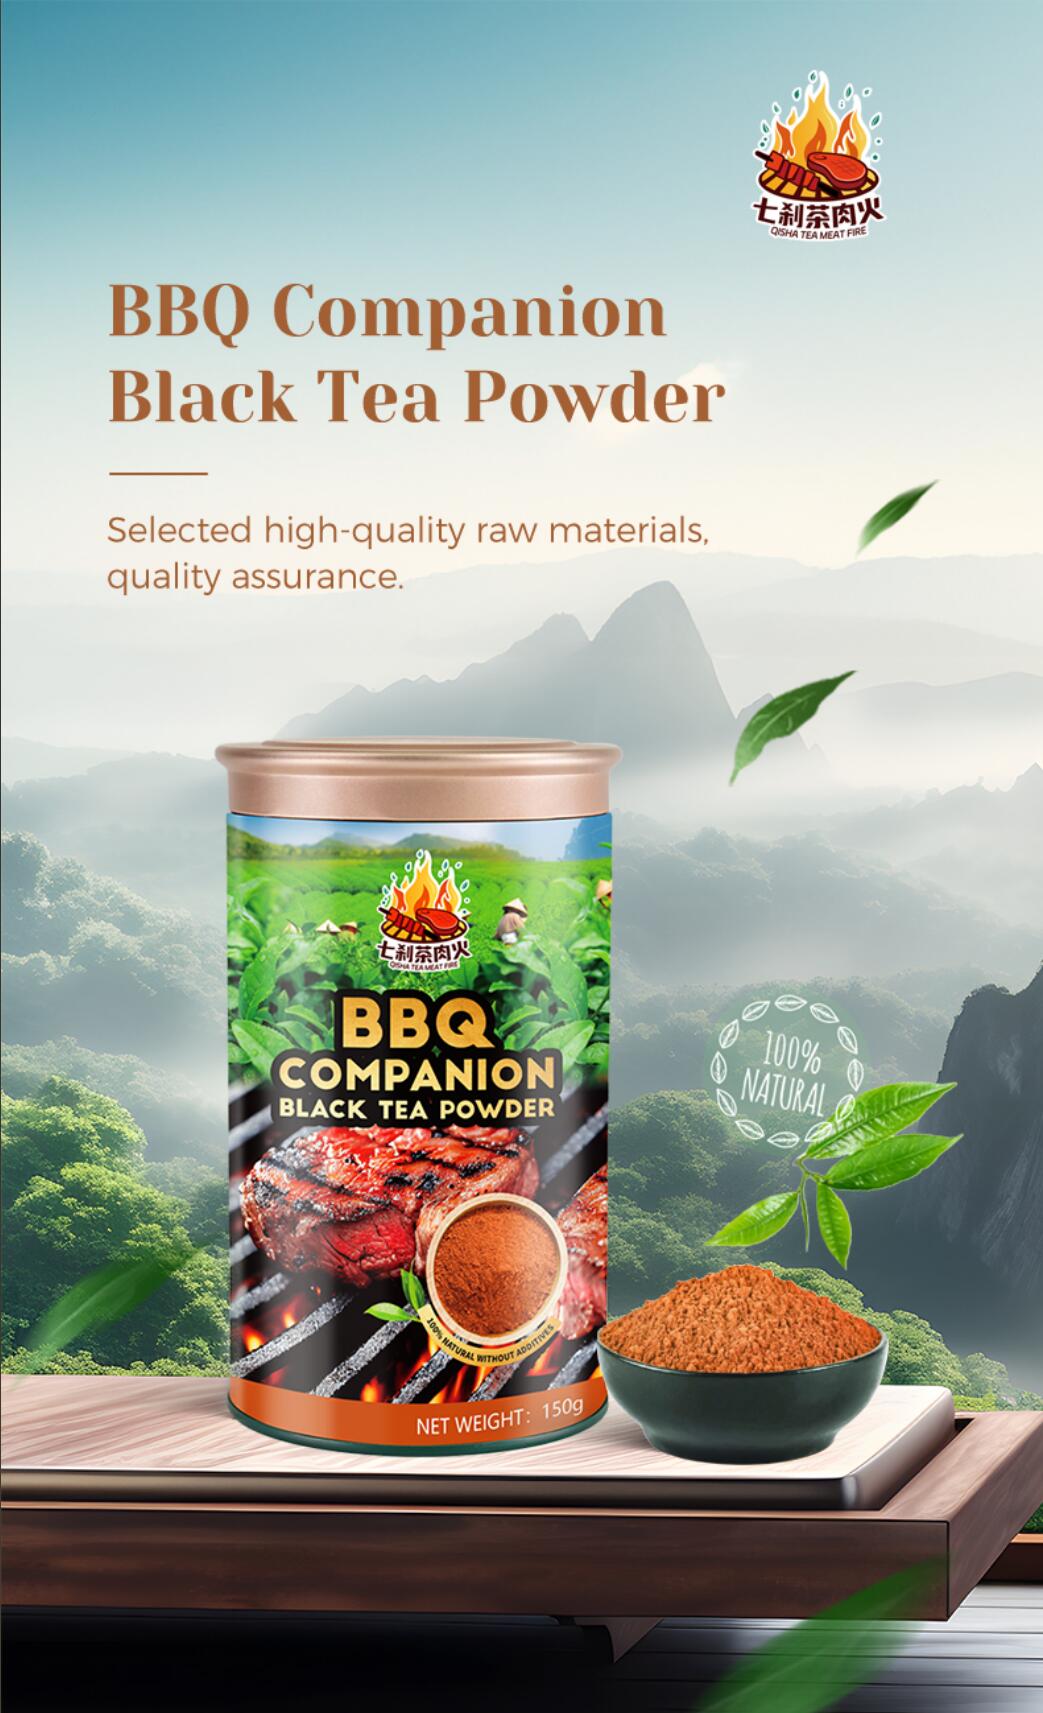 The perfect combination of tea powder seasoning and barbecue插图